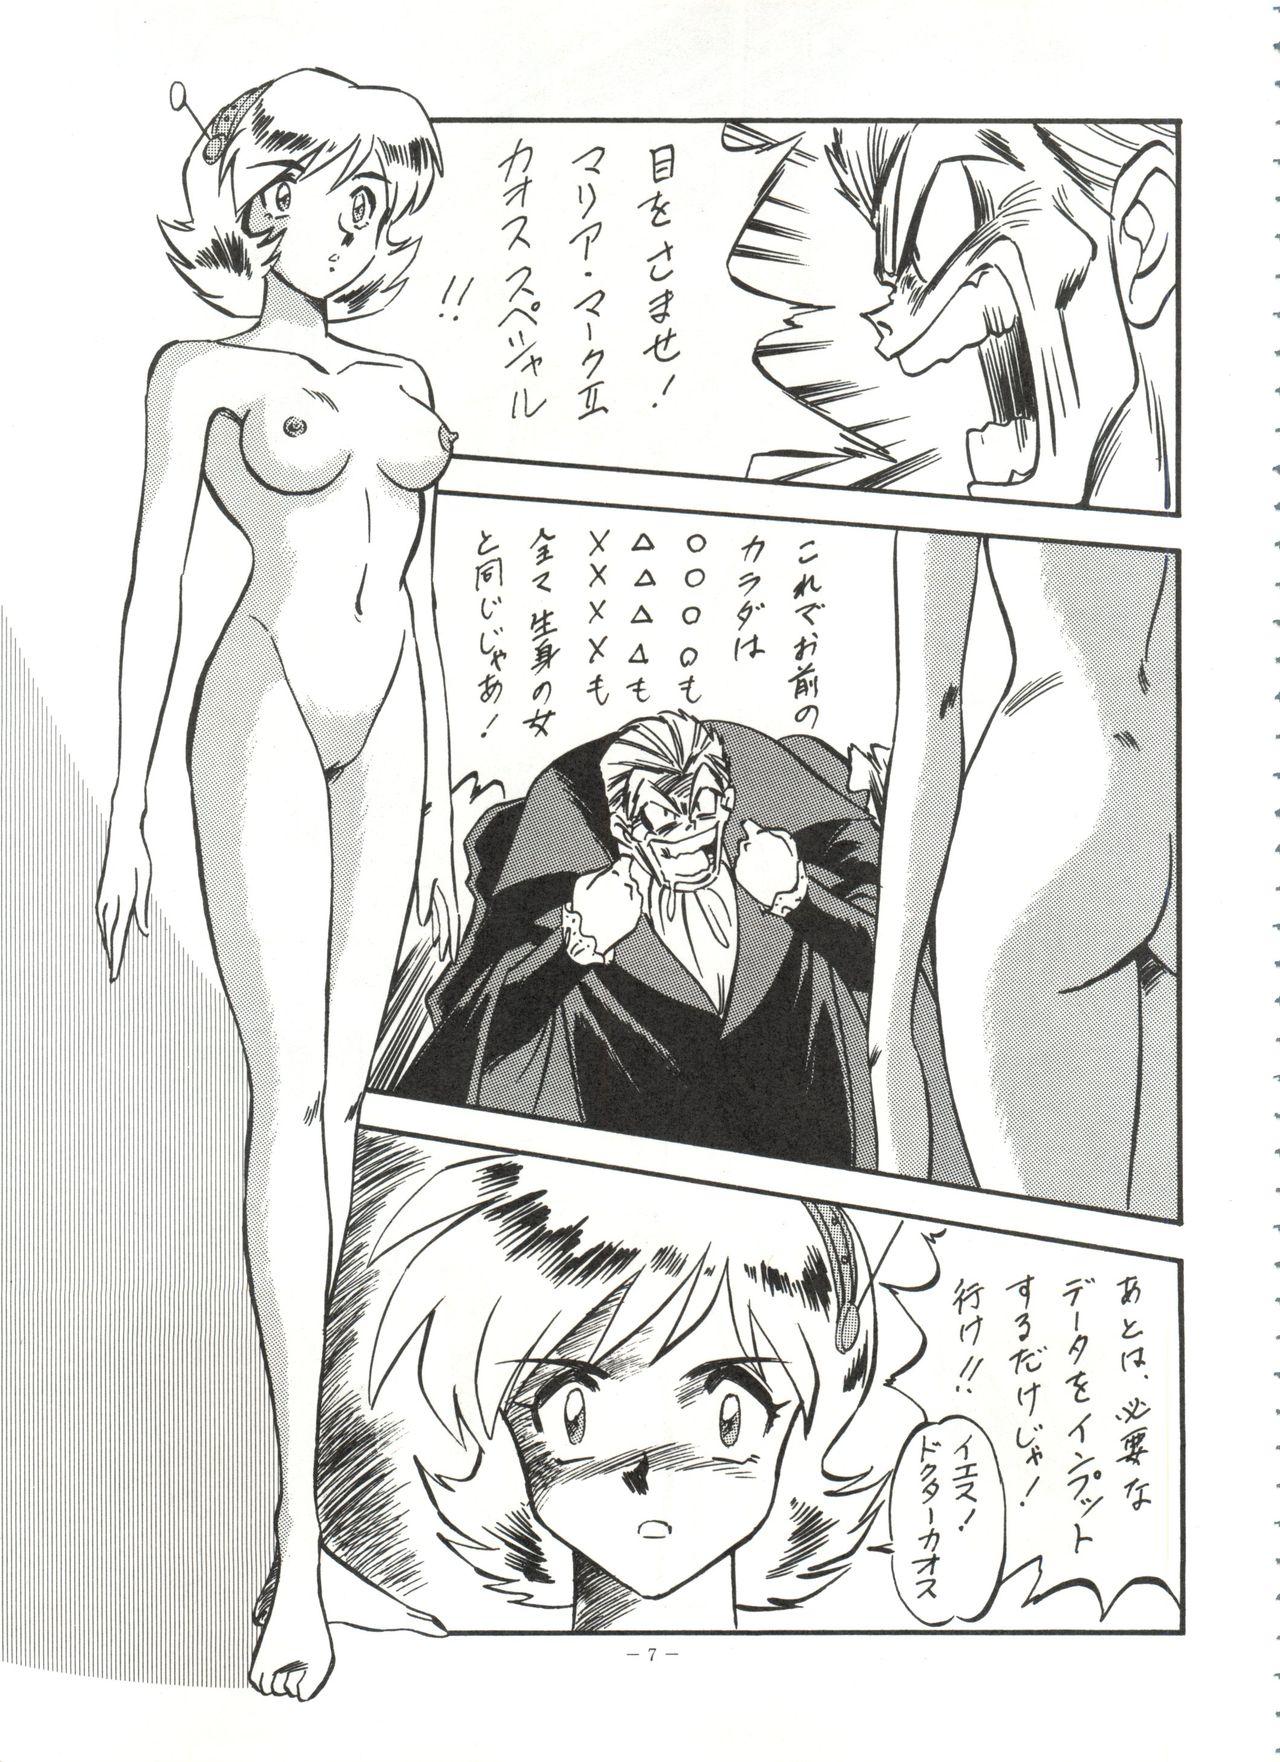 Gag LOOK OUT 31 - Sailor moon Ghost sweeper mikami Lord of lords ryu knight Patlabor Brave police j decker Negro - Page 6